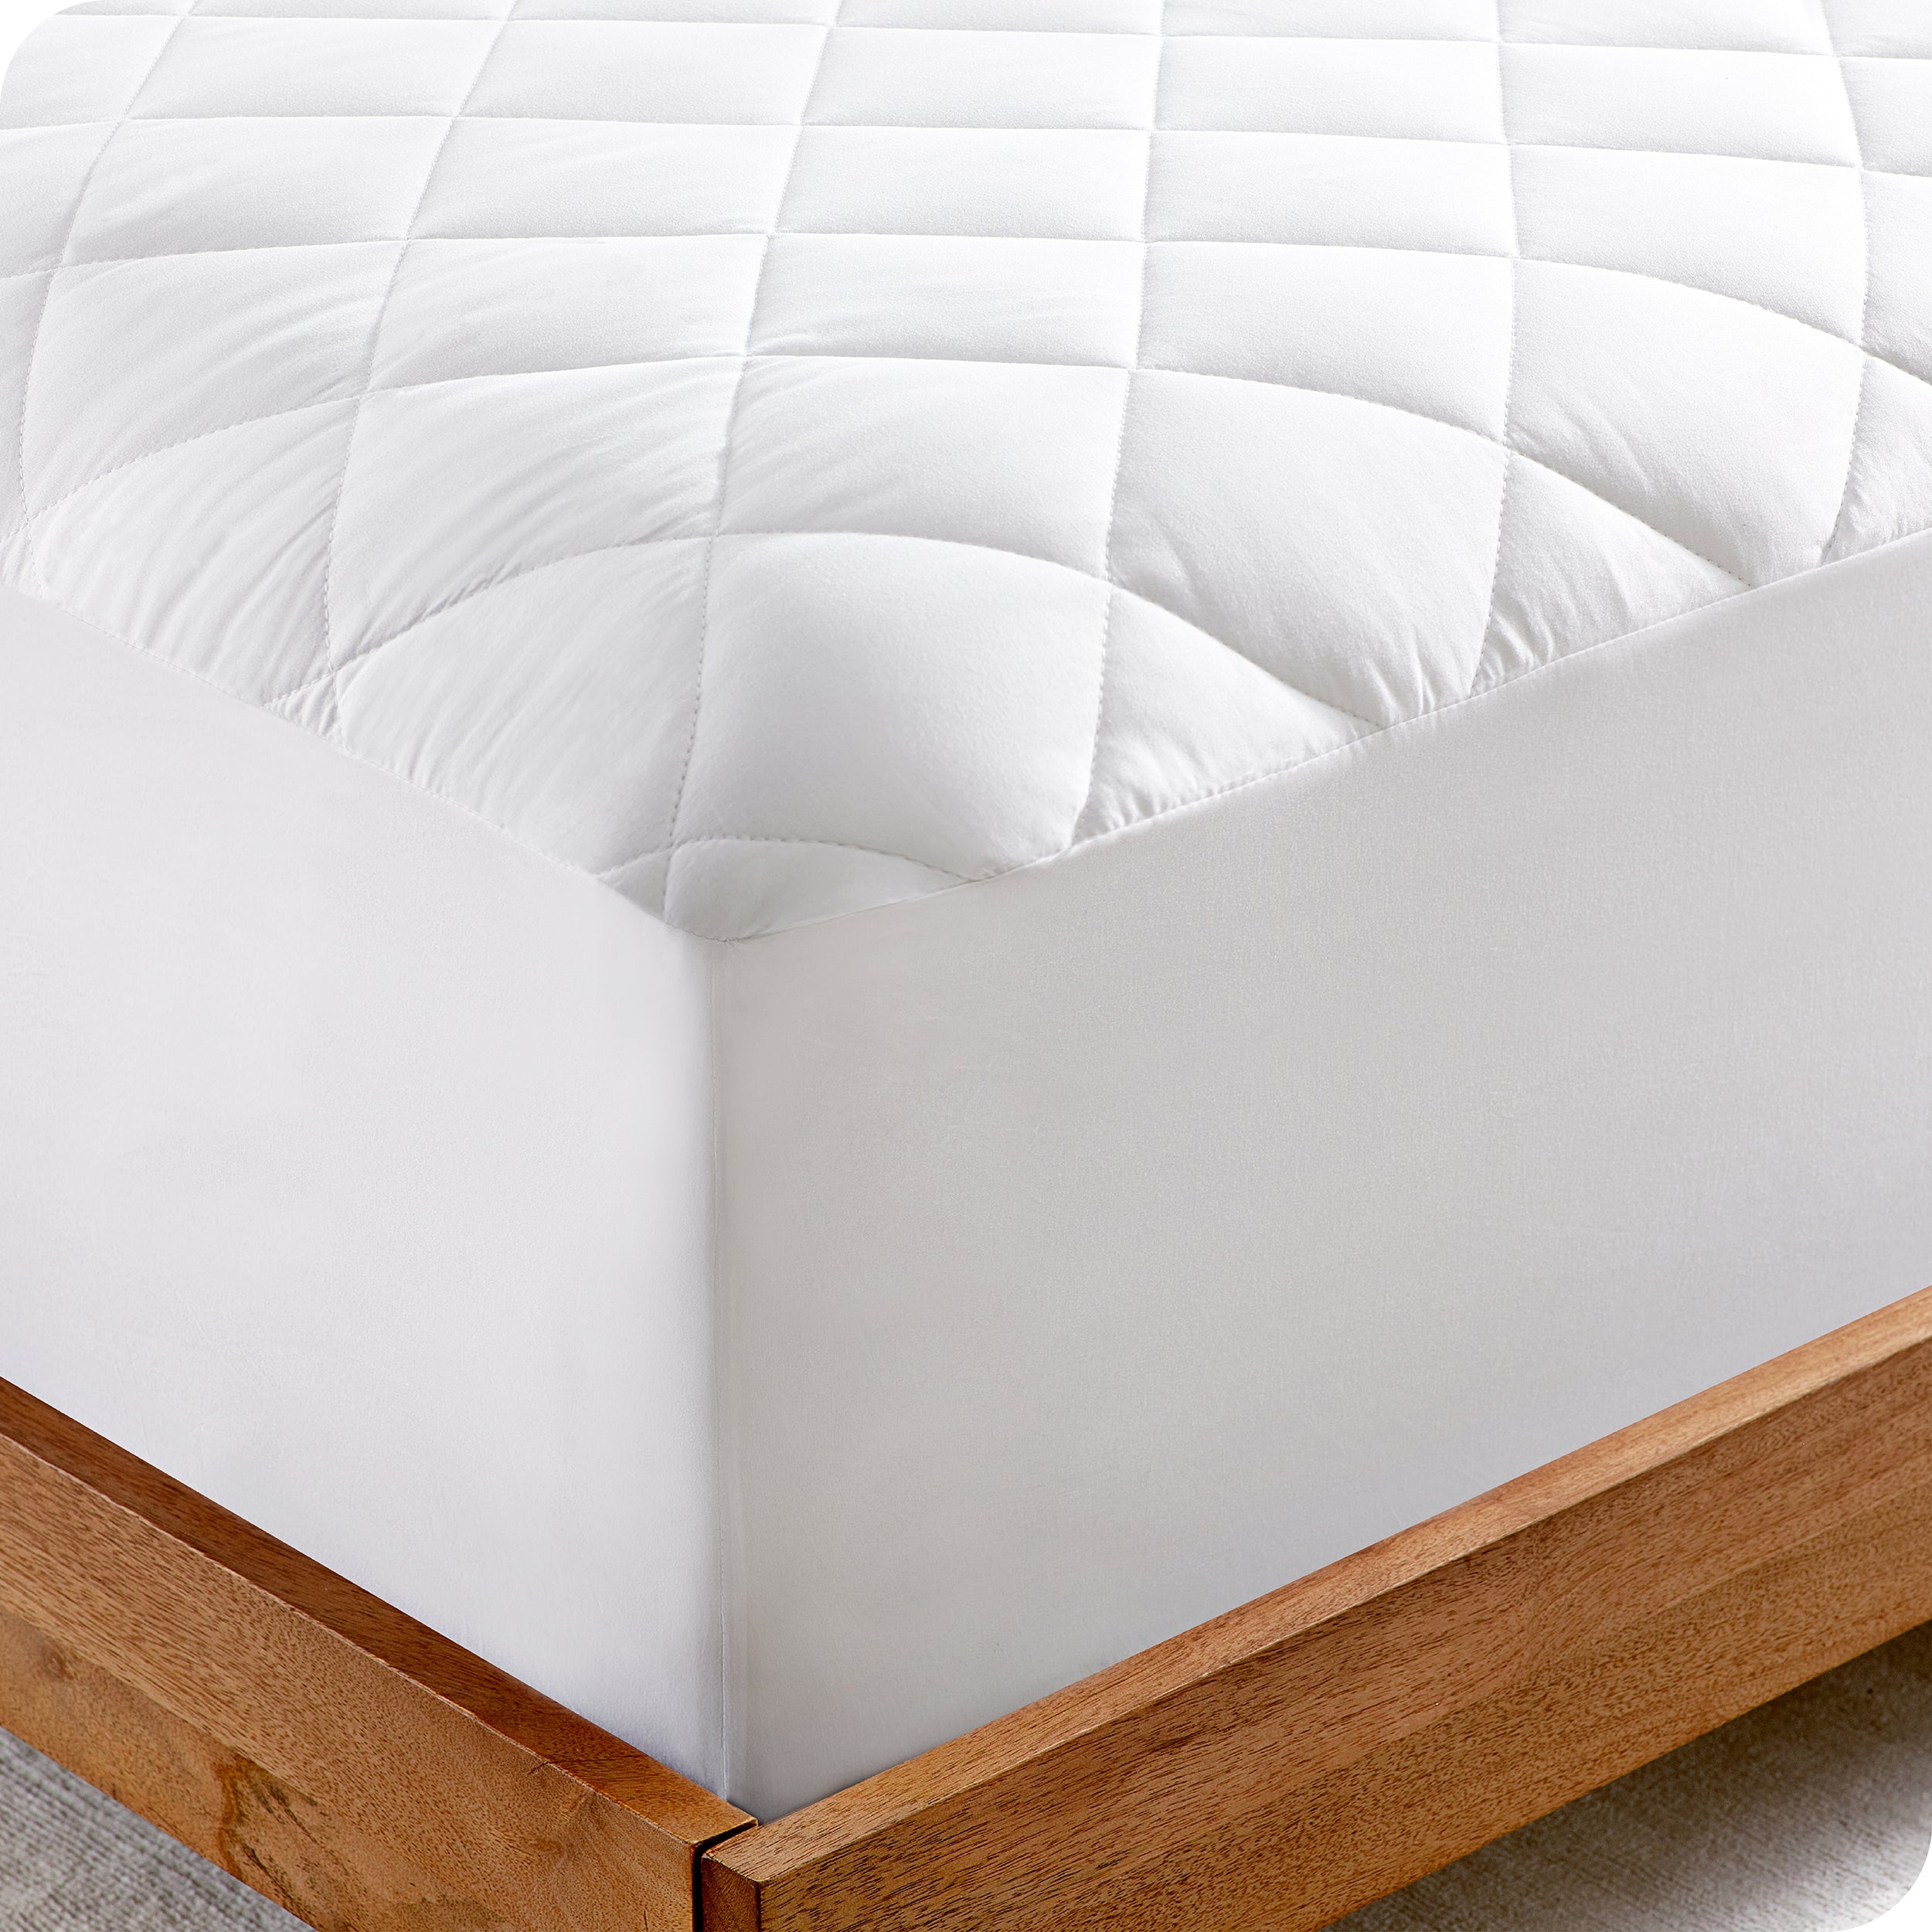 Corner of a mattress on a wood bed frame. A white quilted mattress pad is covering the mattress.